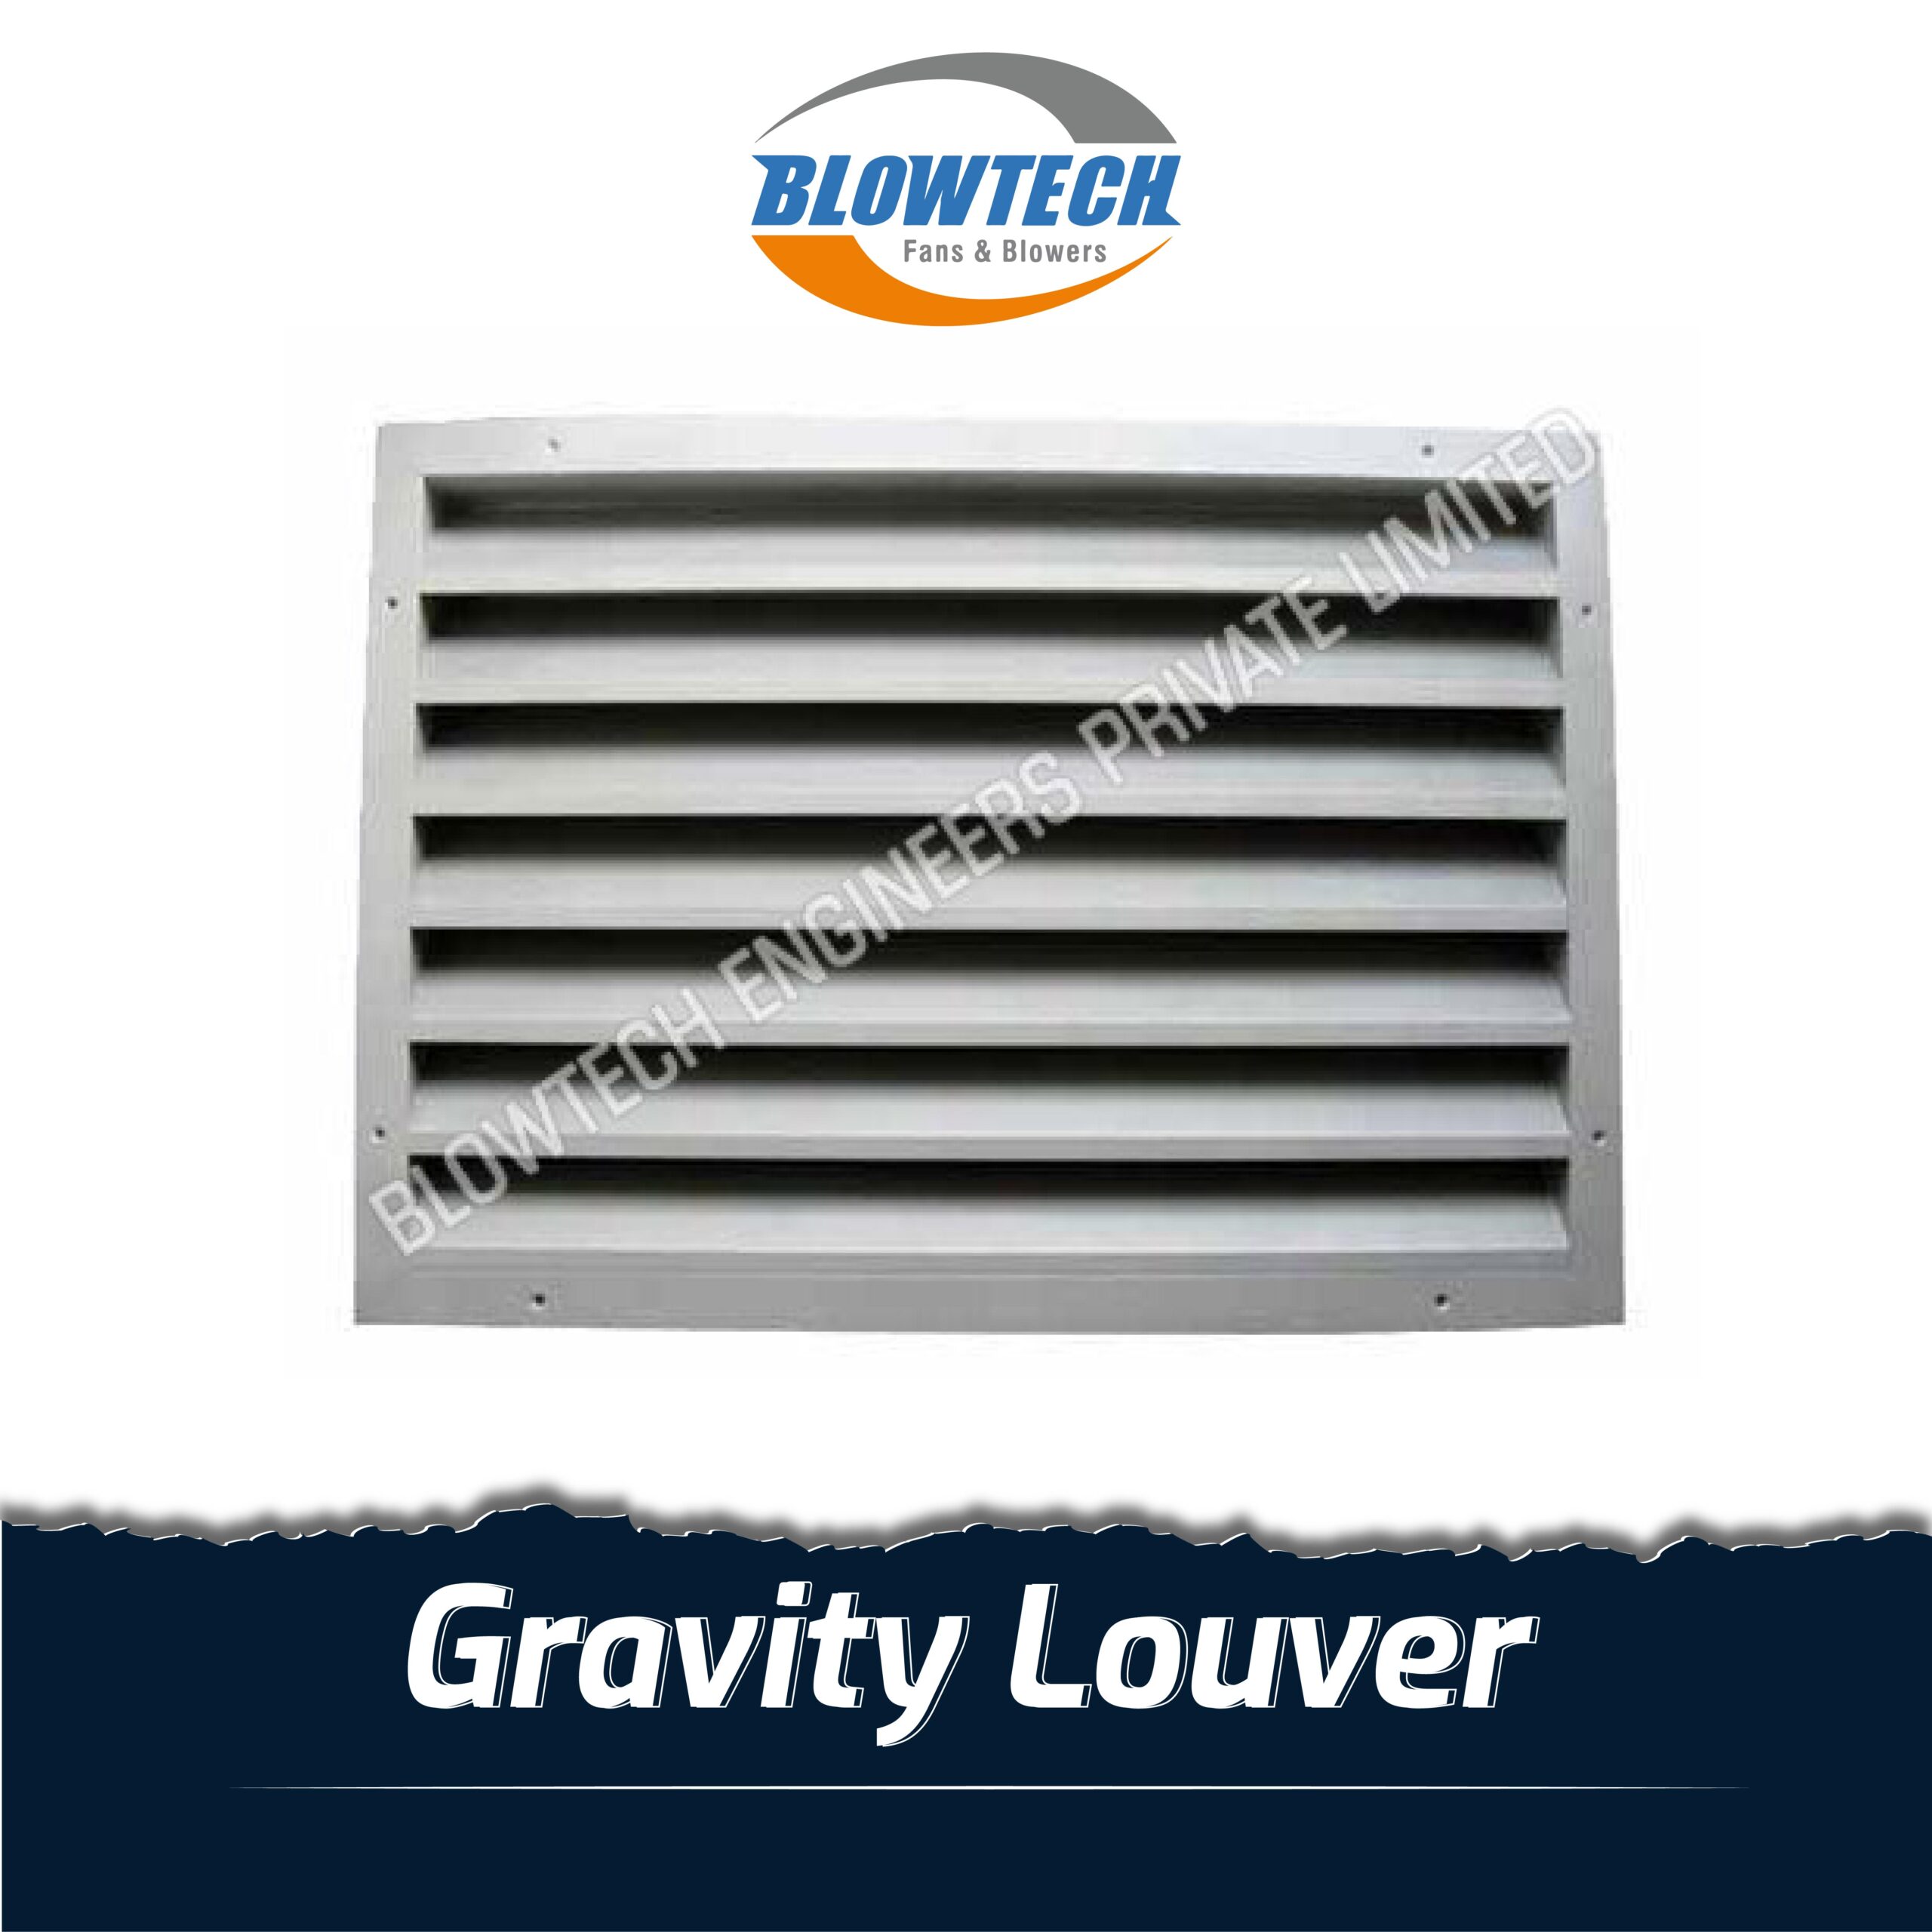 Gravity Louver Damper  manufacturer, supplier and exporter in Mumbai, India